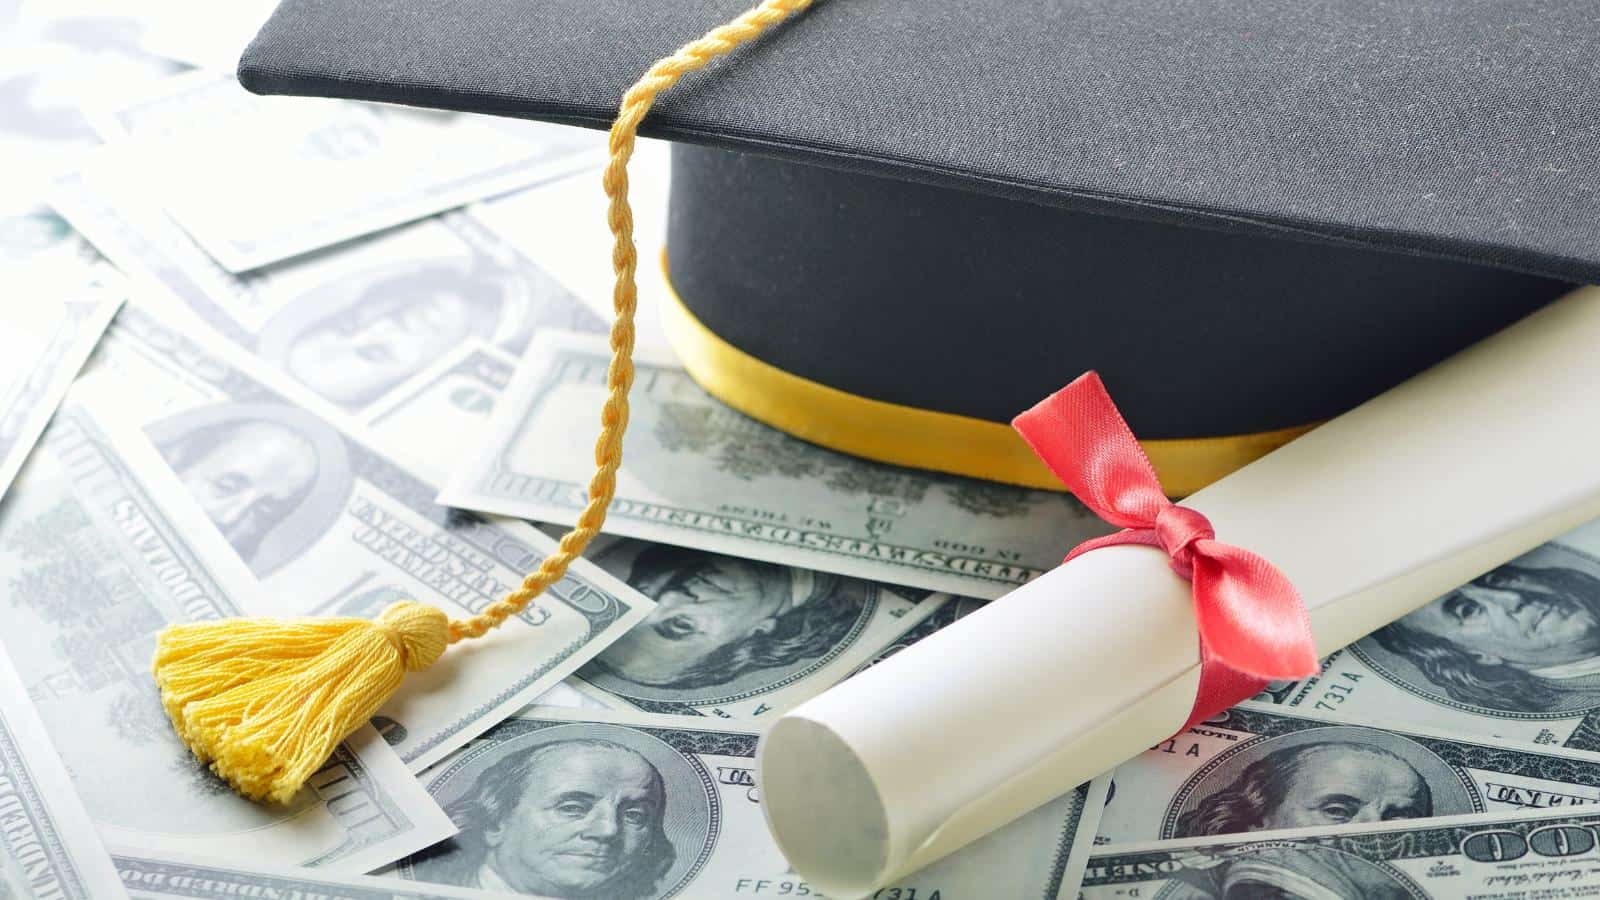 <p>Tuition in the U.S. is very expensive. <a href="https://www.bestcolleges.com/research/average-cost-of-college/#:~:text=The%20average%20college%20tuition%20and,and%20other%20expenses%20%E2%80%94%20was%20%2436%2C436.&text=That's%20roughly%20%24146%2C000%20over%20the%20course%20of%20four%20years.">Best Colleges</a> says, “The average total cost for a year of college at a four-year school—including tuition and fees, on-campus room and board, books, supplies, and other expenses—was $36,436.” If your college tuition was less expensive and you’ve landed a well-paying job, you might be in a better position financially than the average American.</p>